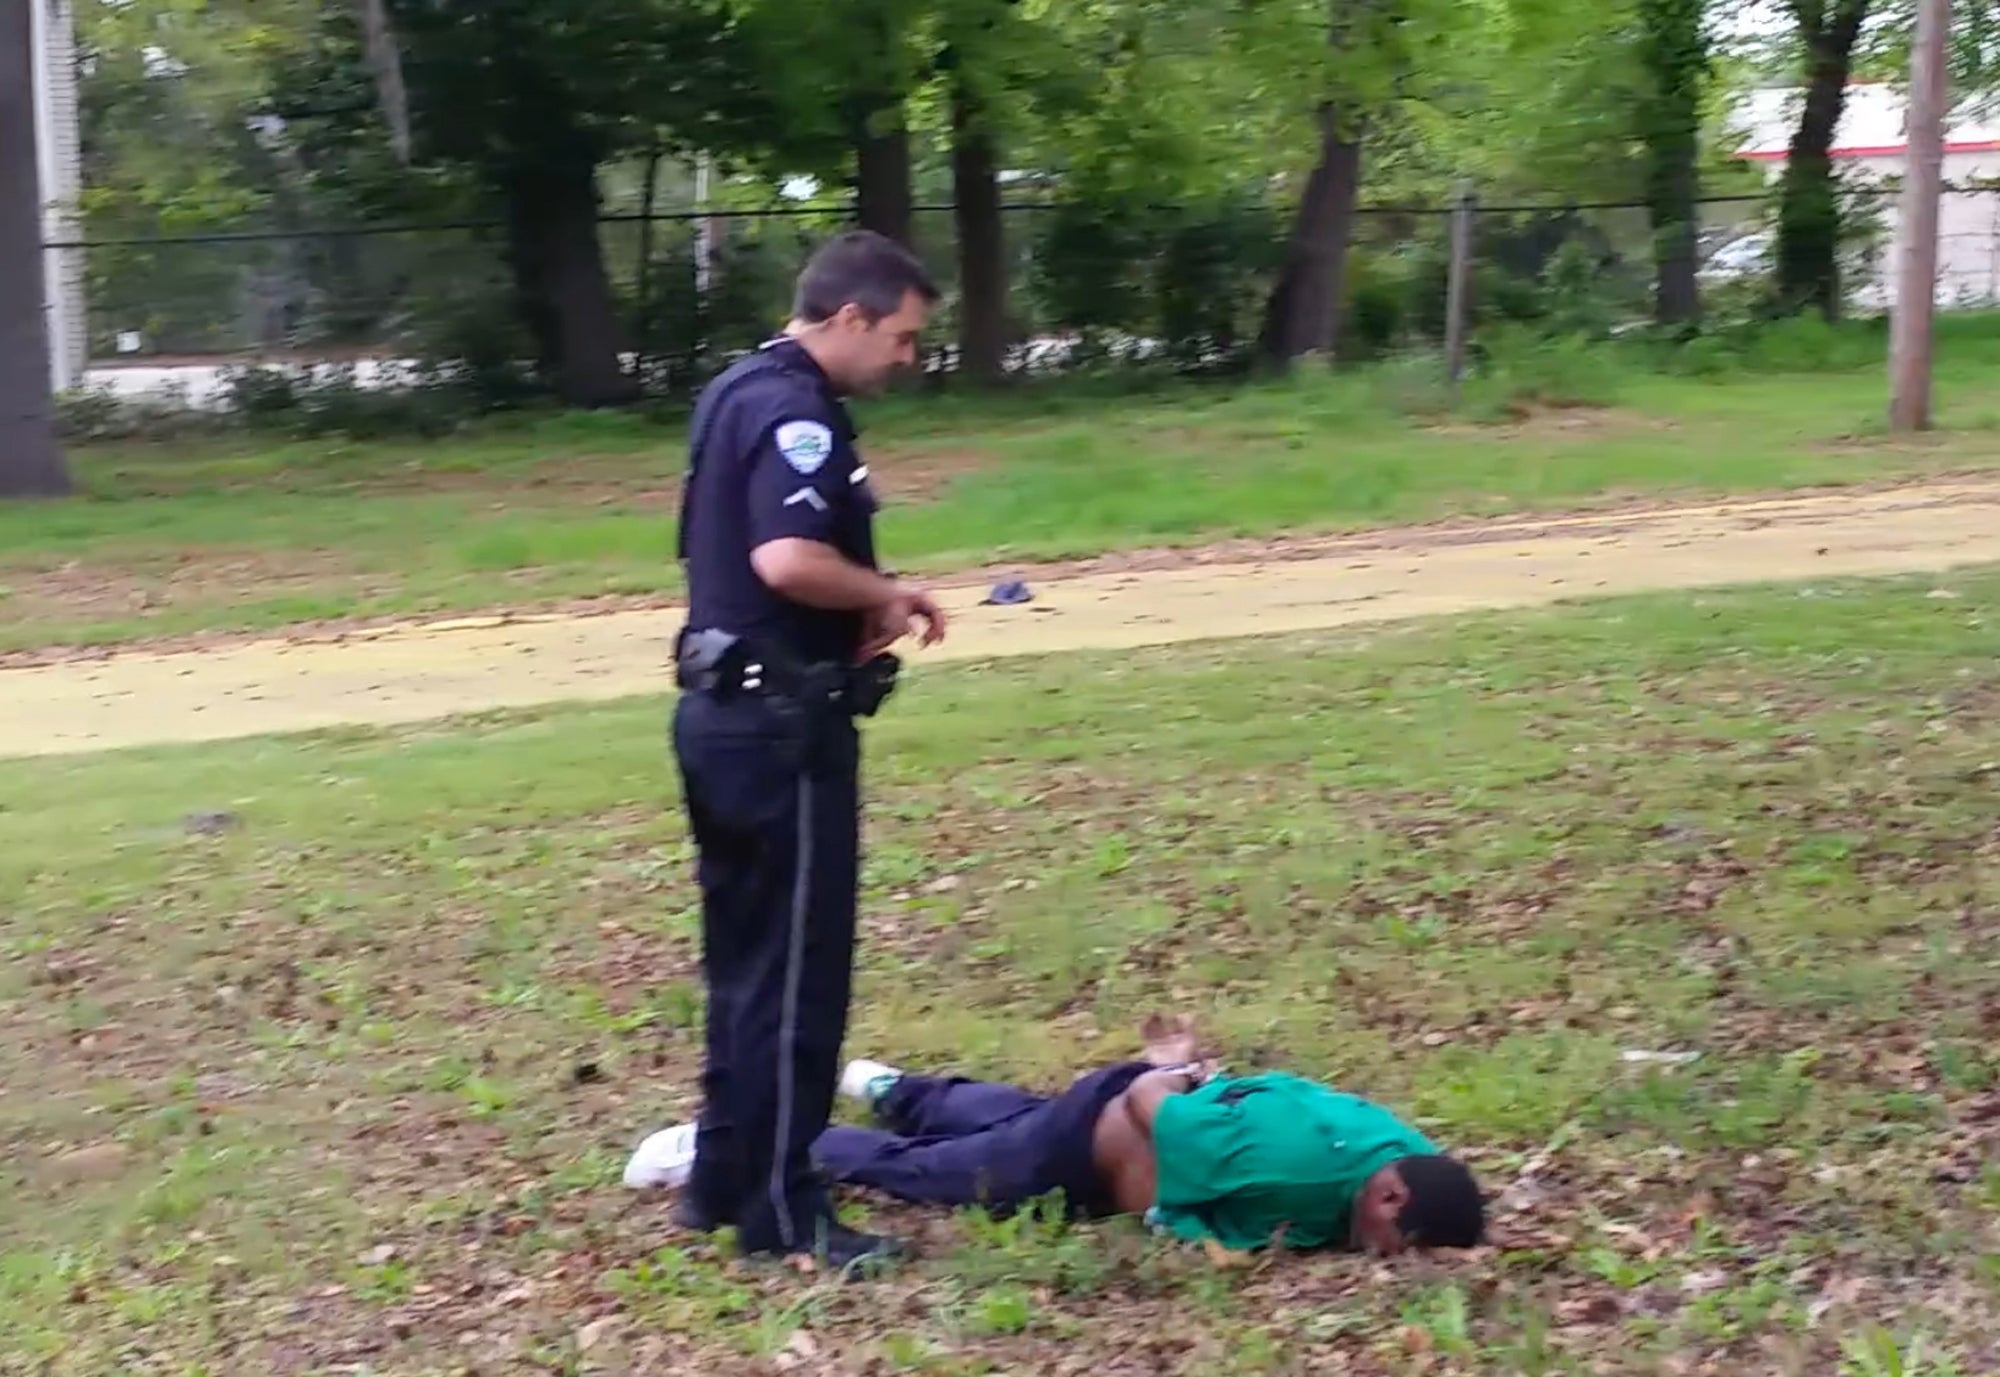 Former Police Officer Indicted on Federal Charges in Walter Scott Death
